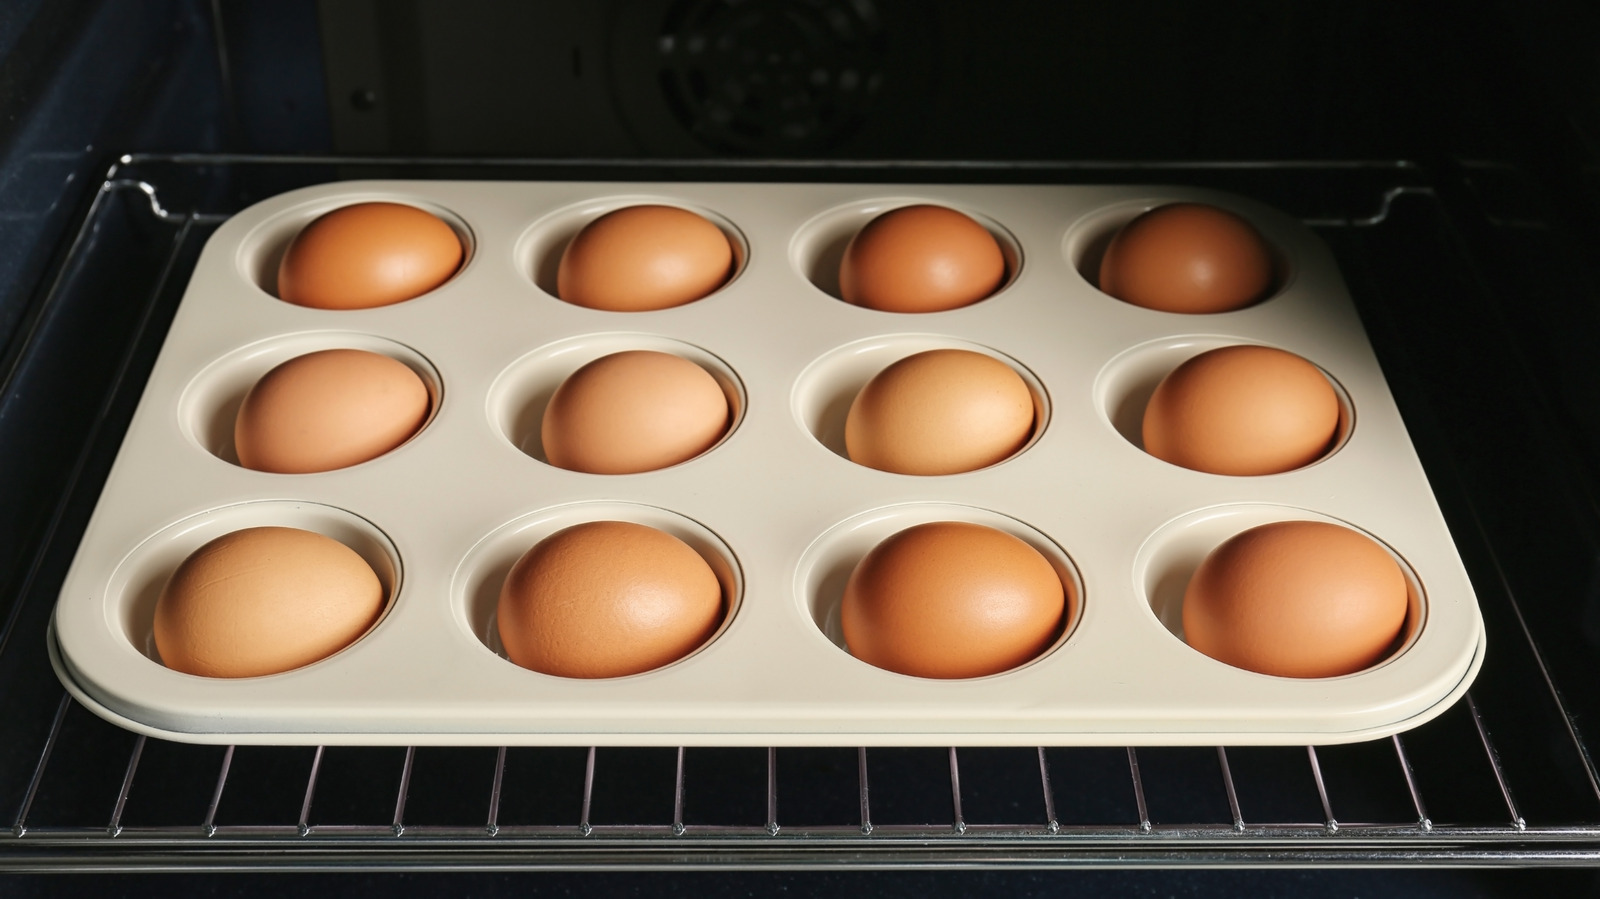 https://www.tastingtable.com/img/gallery/why-you-should-try-cooking-eggs-in-a-muffin-pan/l-intro-1670969722.jpg